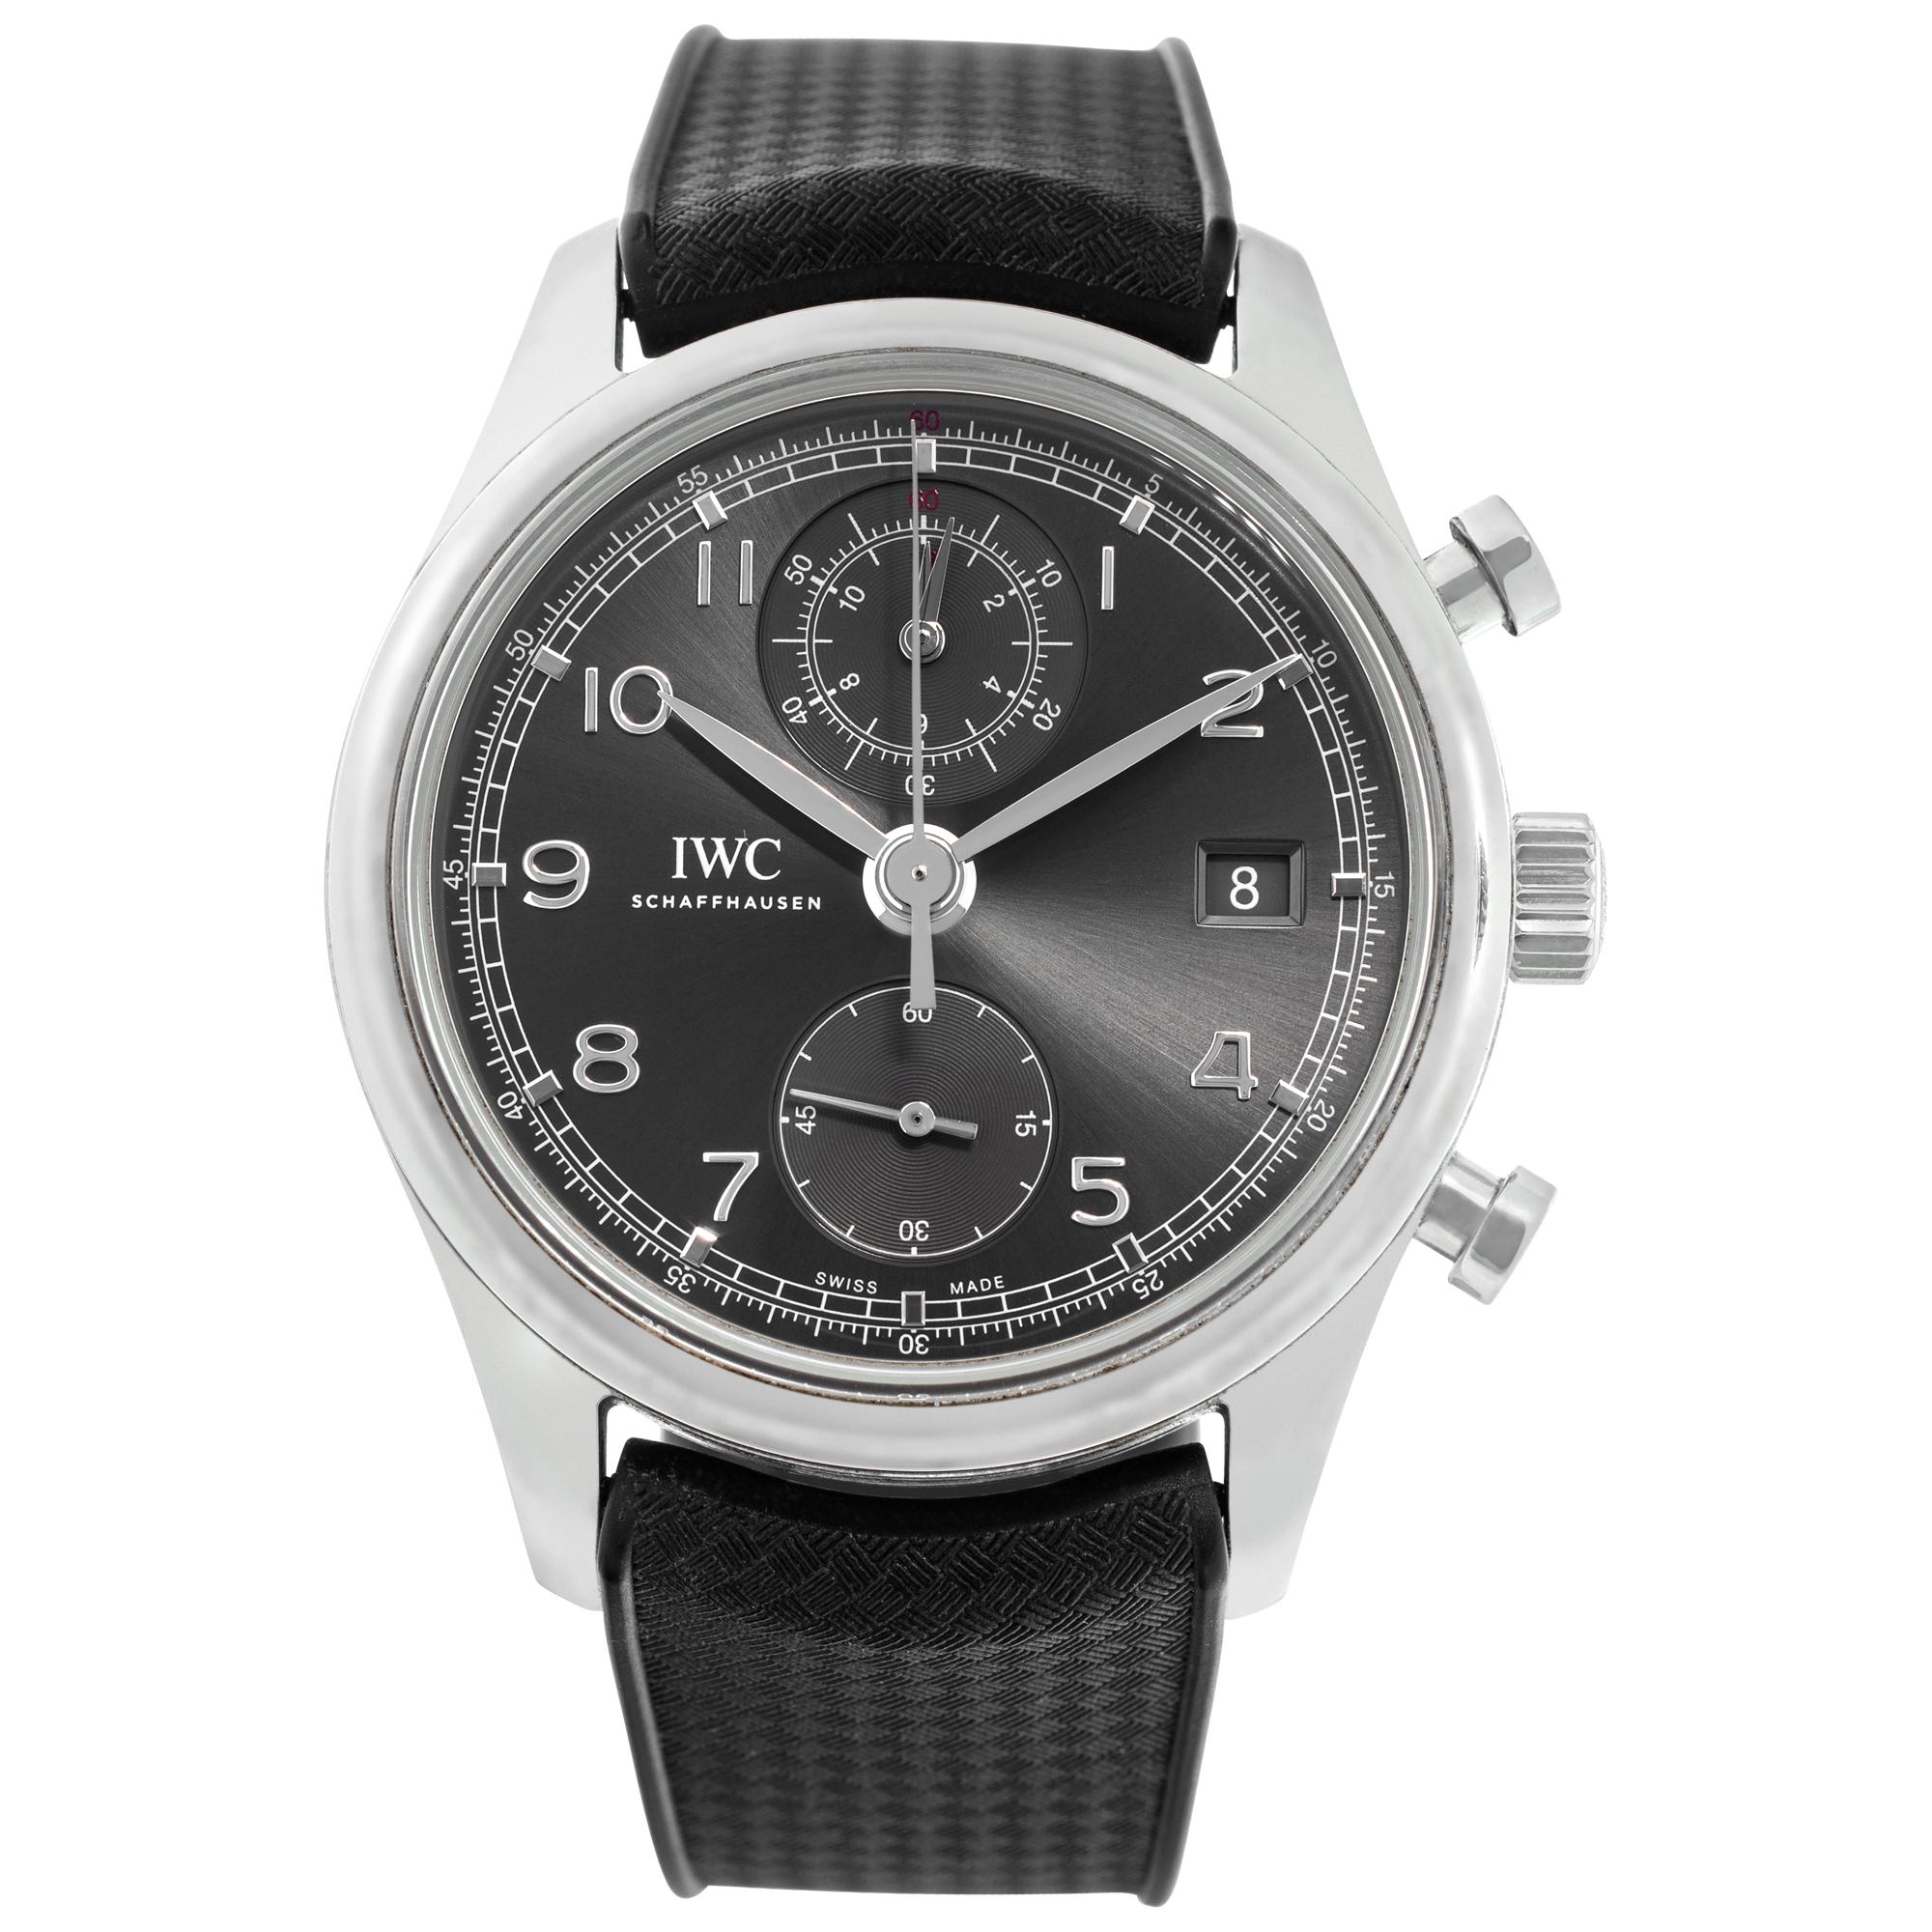 What does IWC stand for in watches?